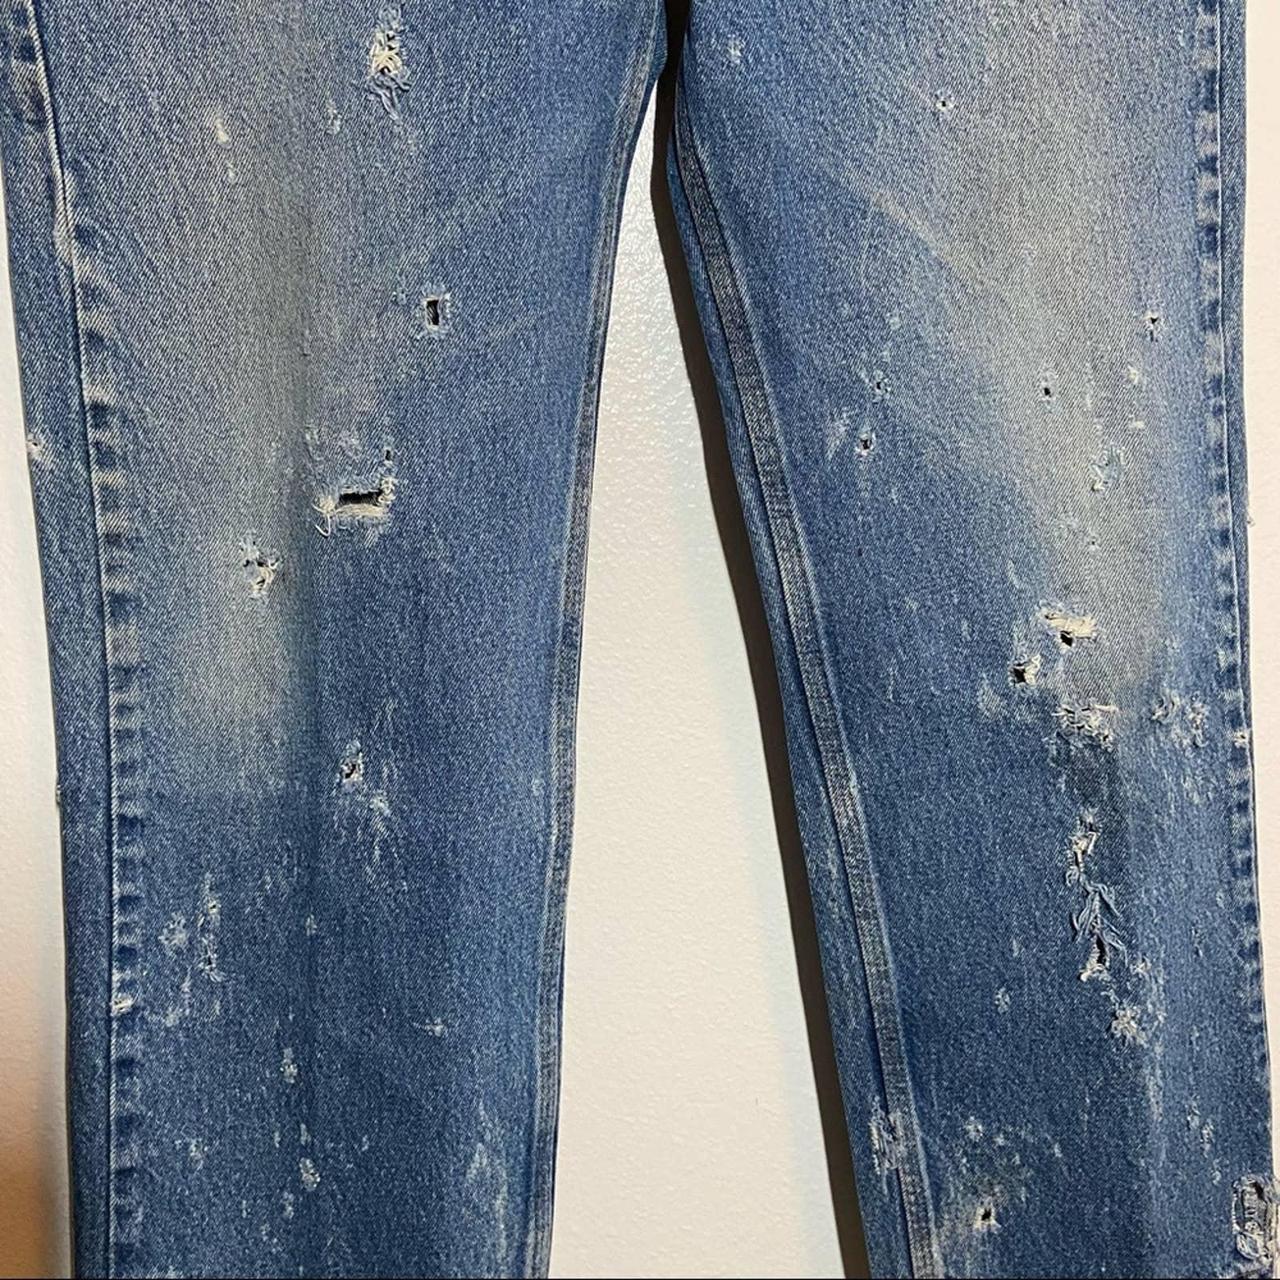 Product Image 2 - Carhartt Trashed Jeans Relaxed Fit